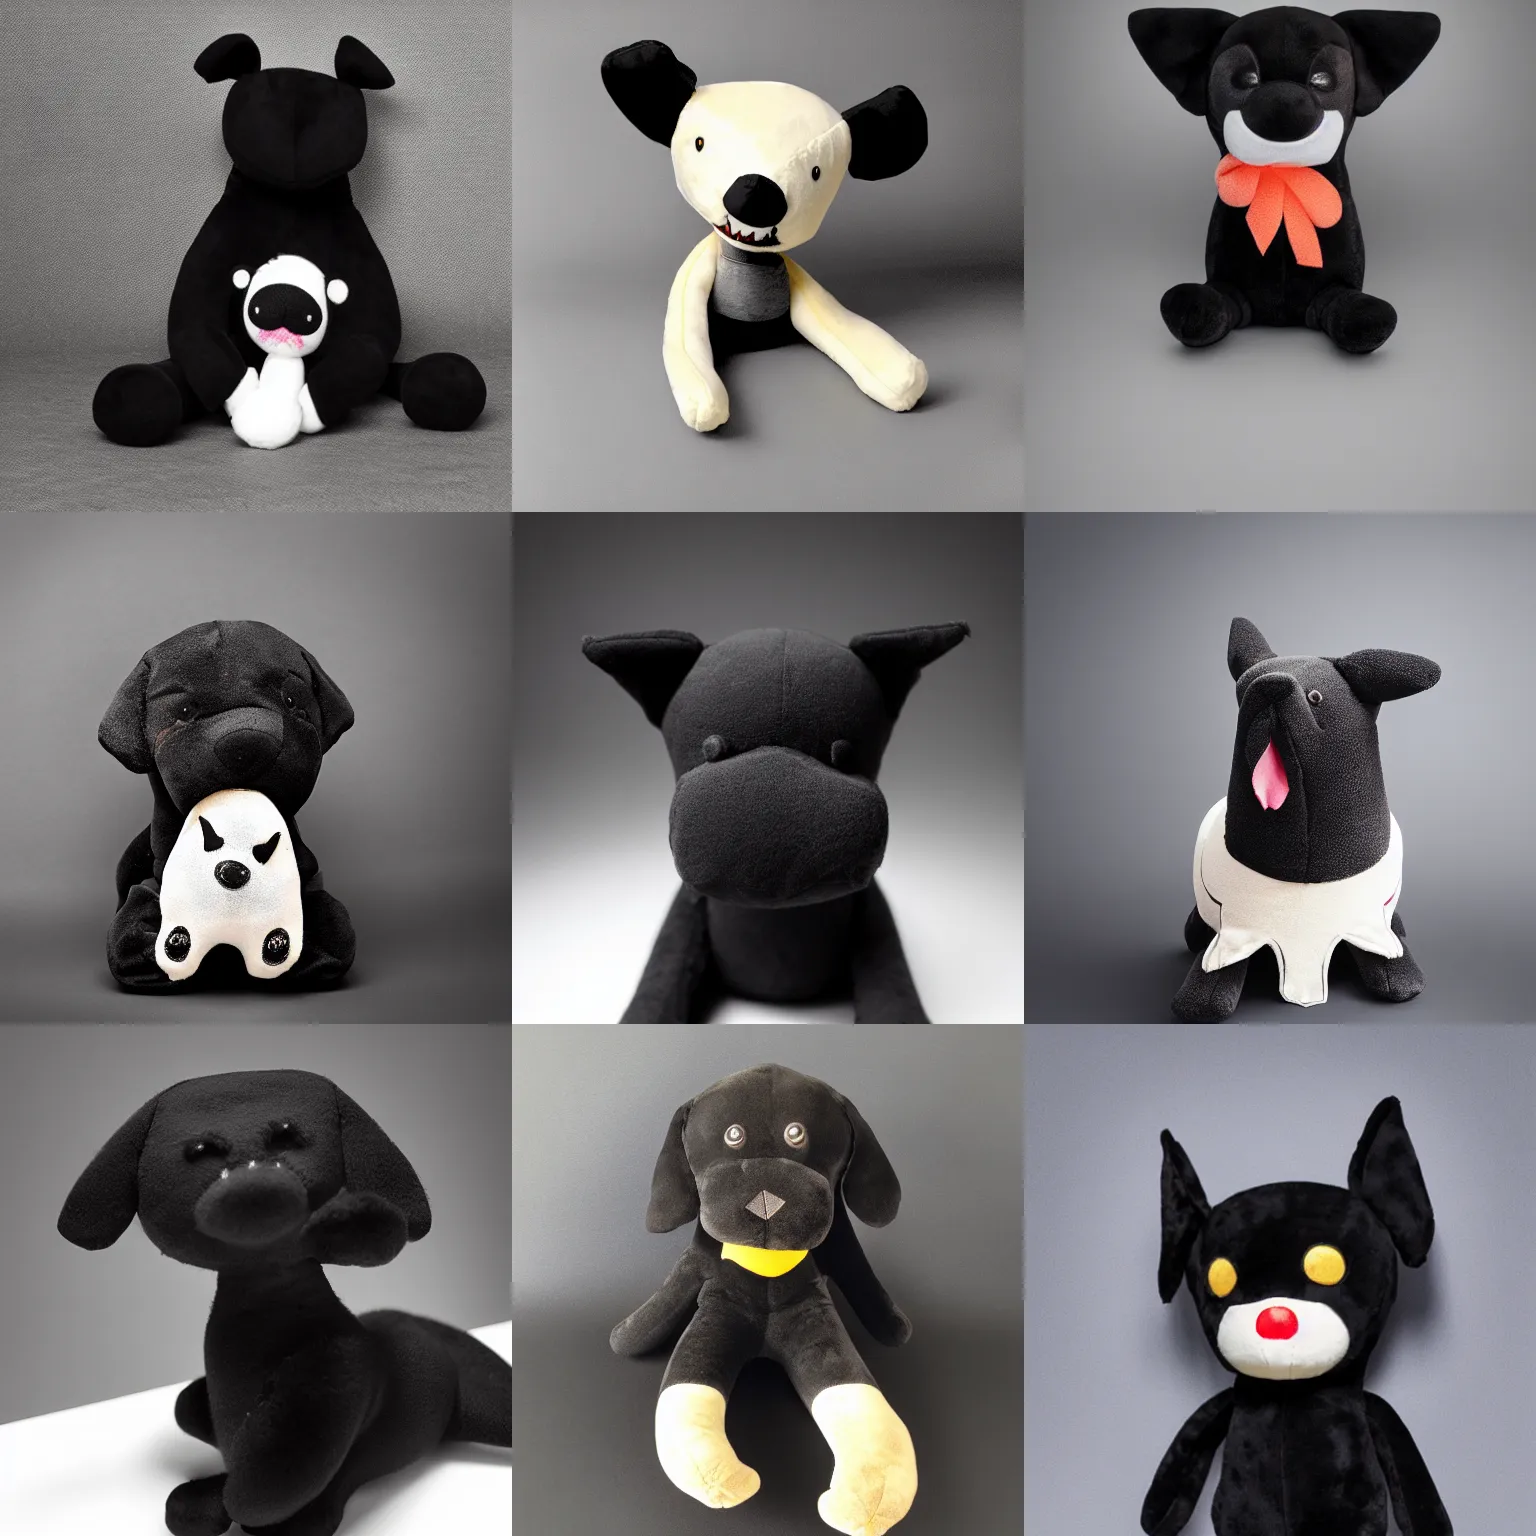 Prompt: A plushie of a scary black dog, studio lighting